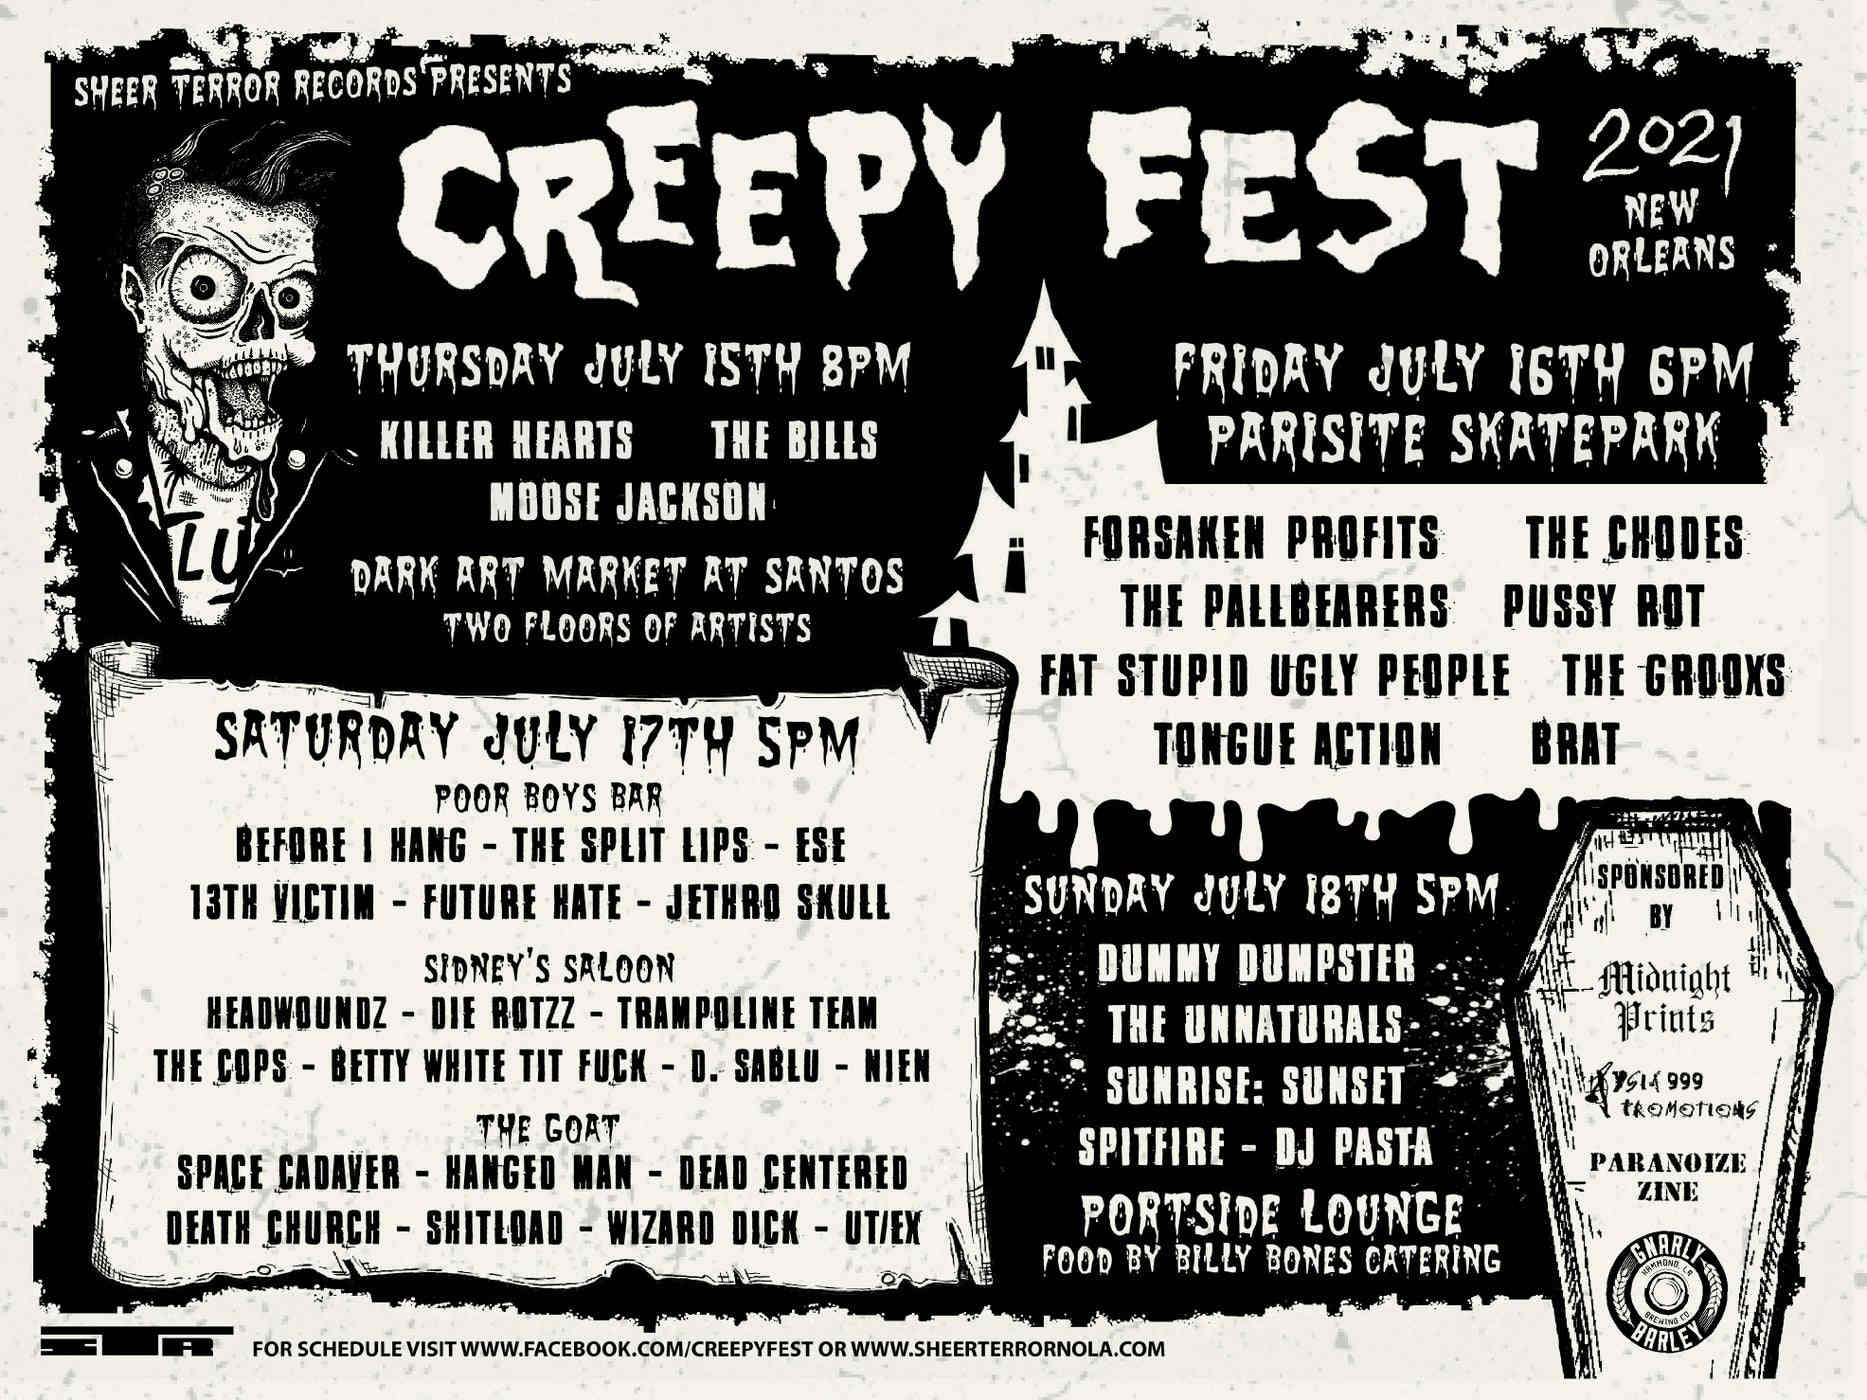 12th Annual Creepy Fest 2021 New Orleans Local Events